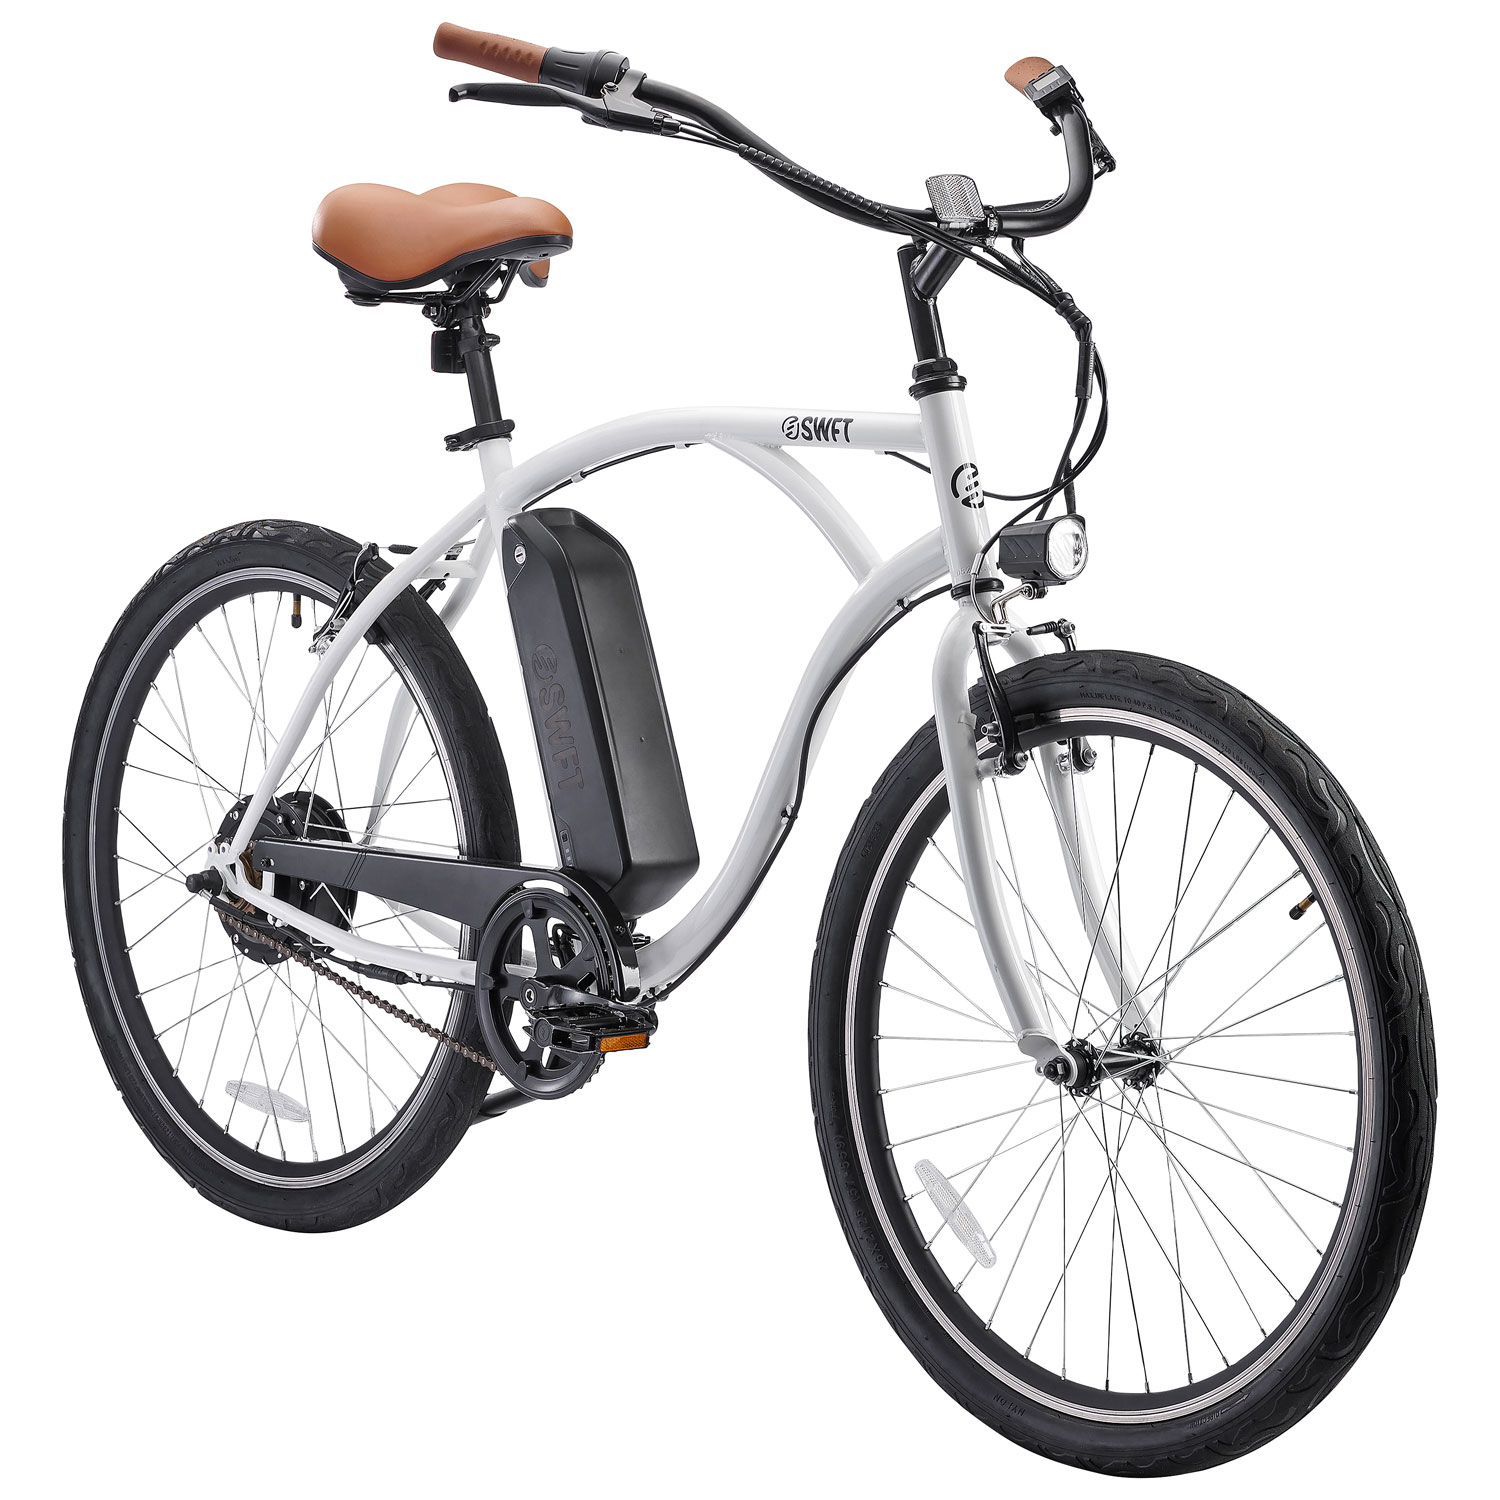 SWFT Fleet 500W Electric City Bike with up to 59.9km Battery Life - White - Only at Best Buy